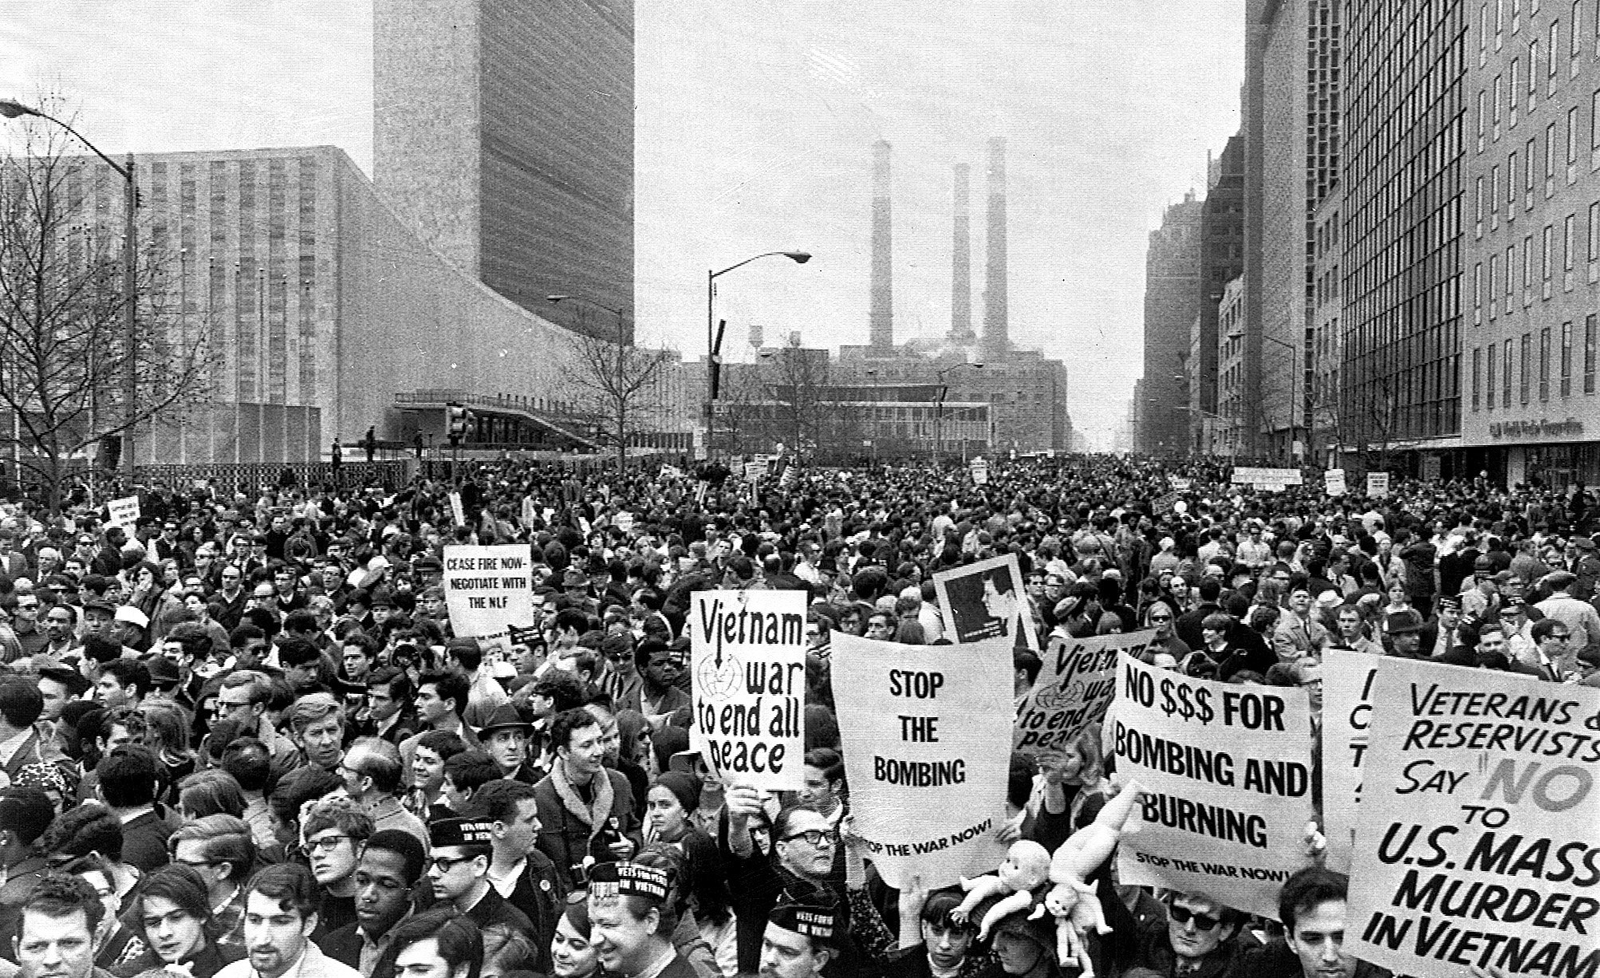 A nineteen sixty-seven photograph of an anti-Vietnam War demonstration at the United Nations Plaza in New York.